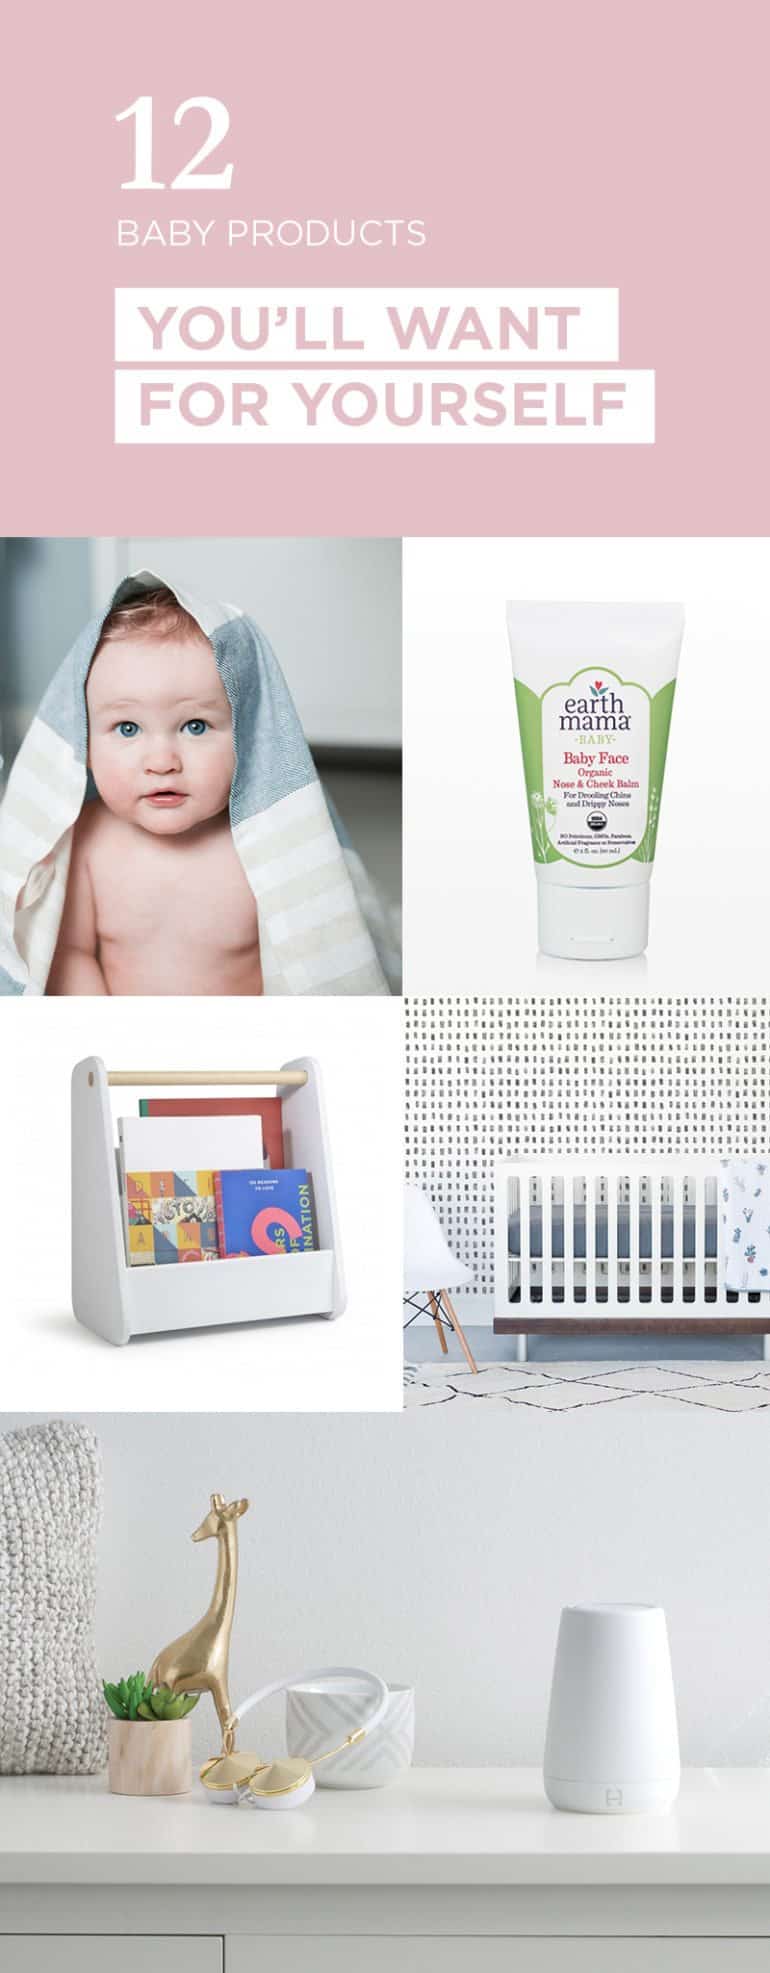 Here are just a few baby items that work just as well for adults. Everything from nightlights to hand cream, you'll want these baby products for yourself!